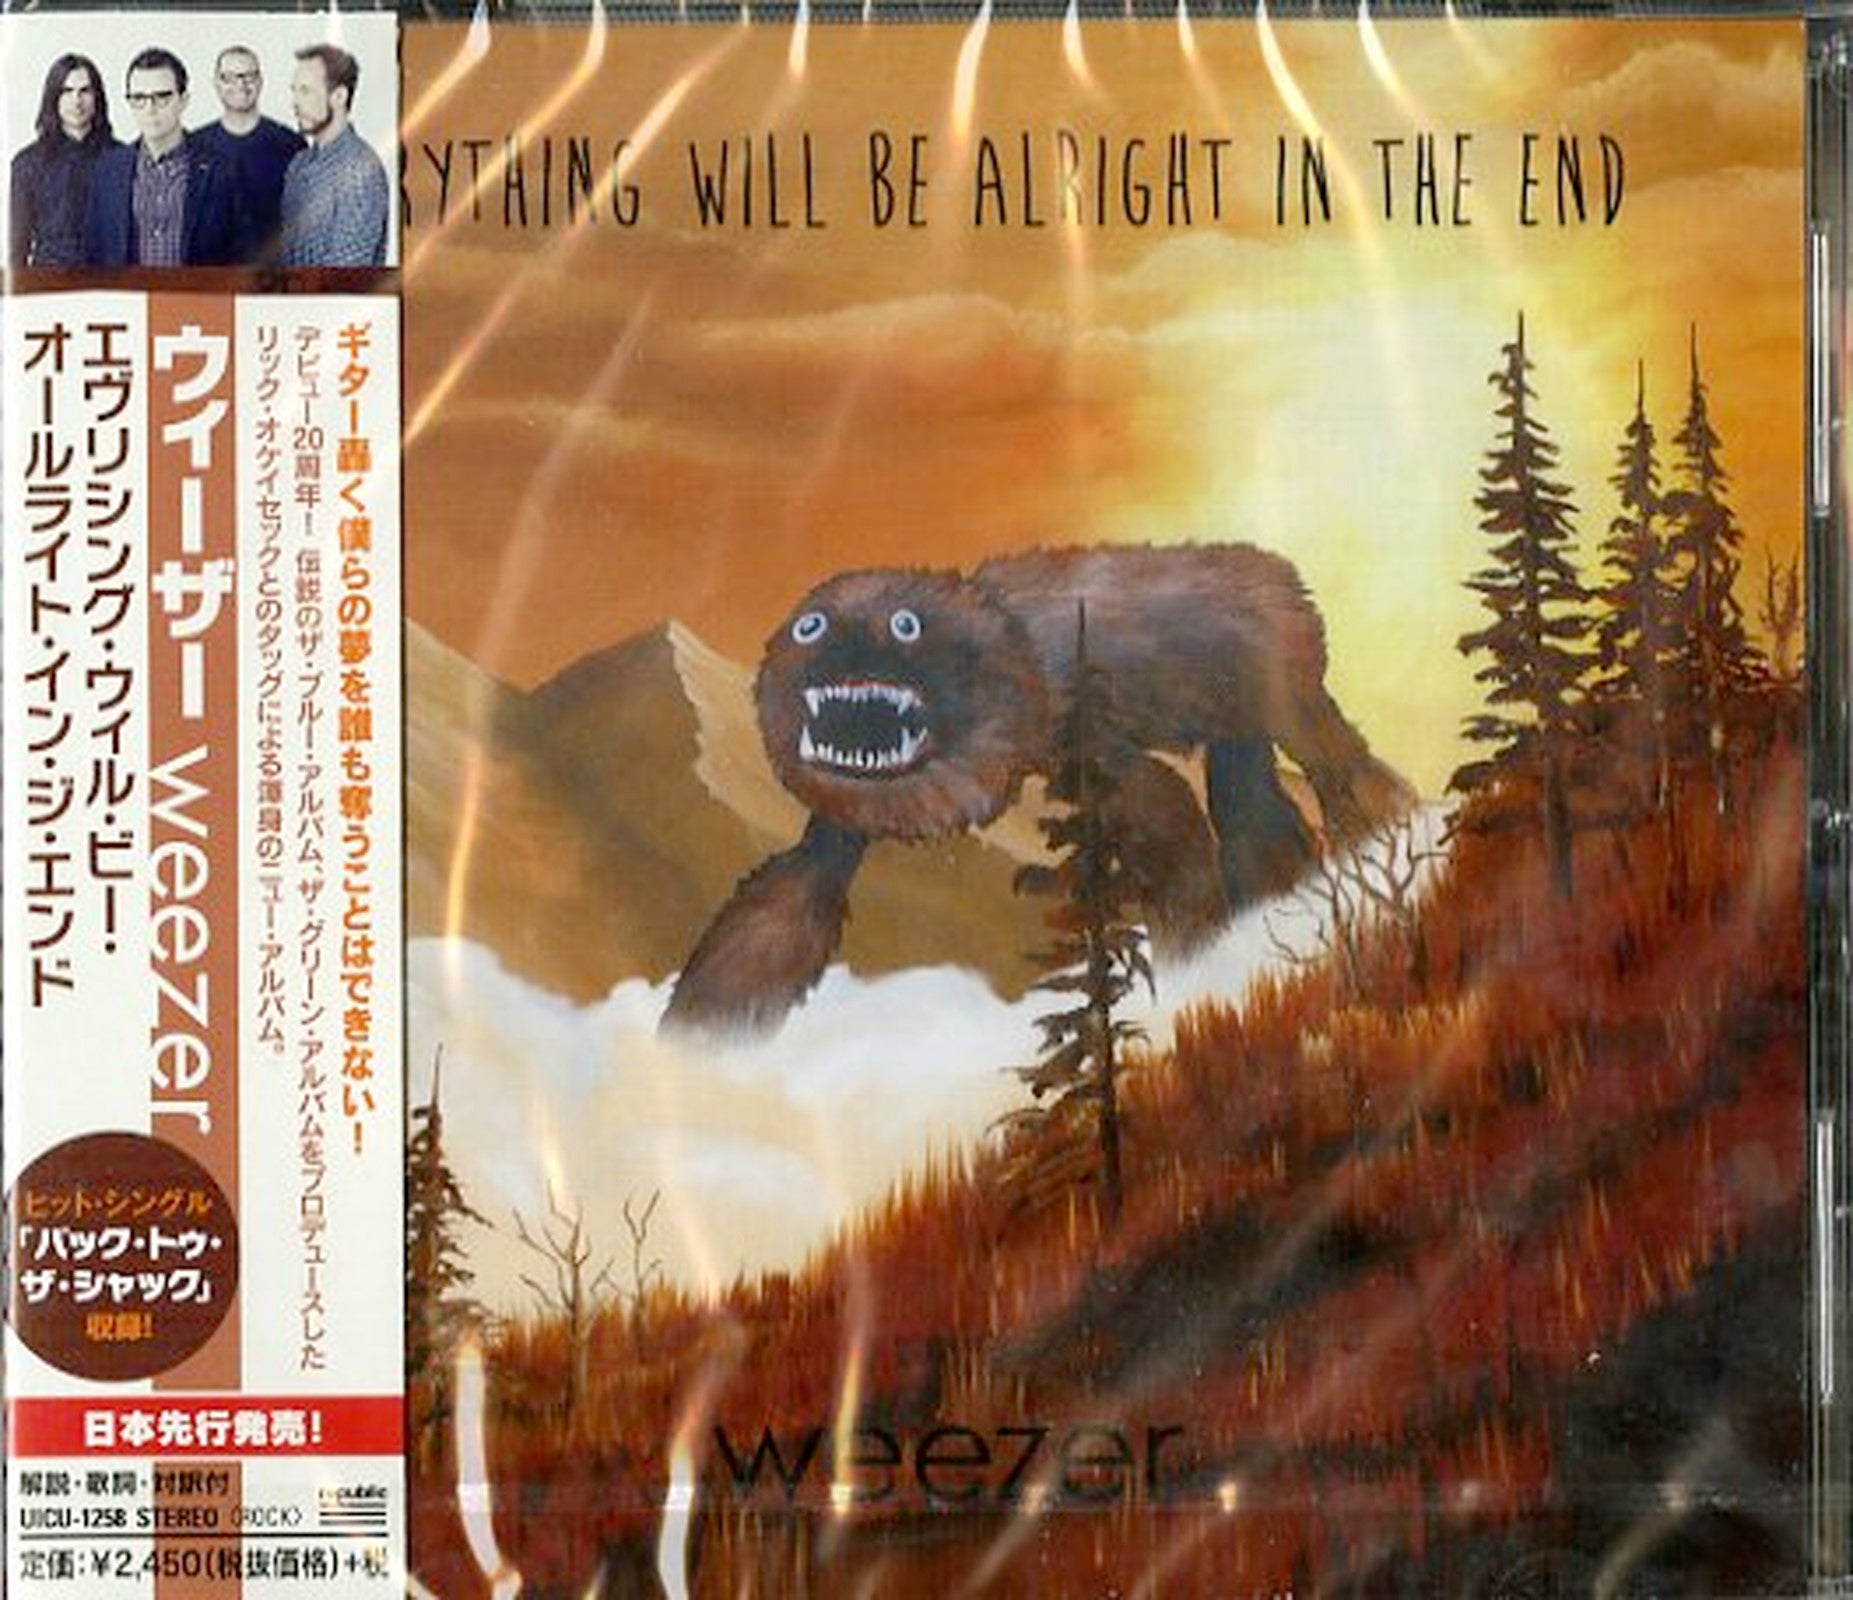 Weezer - Everything Will Be Alright In The End - Japan CD – CDs